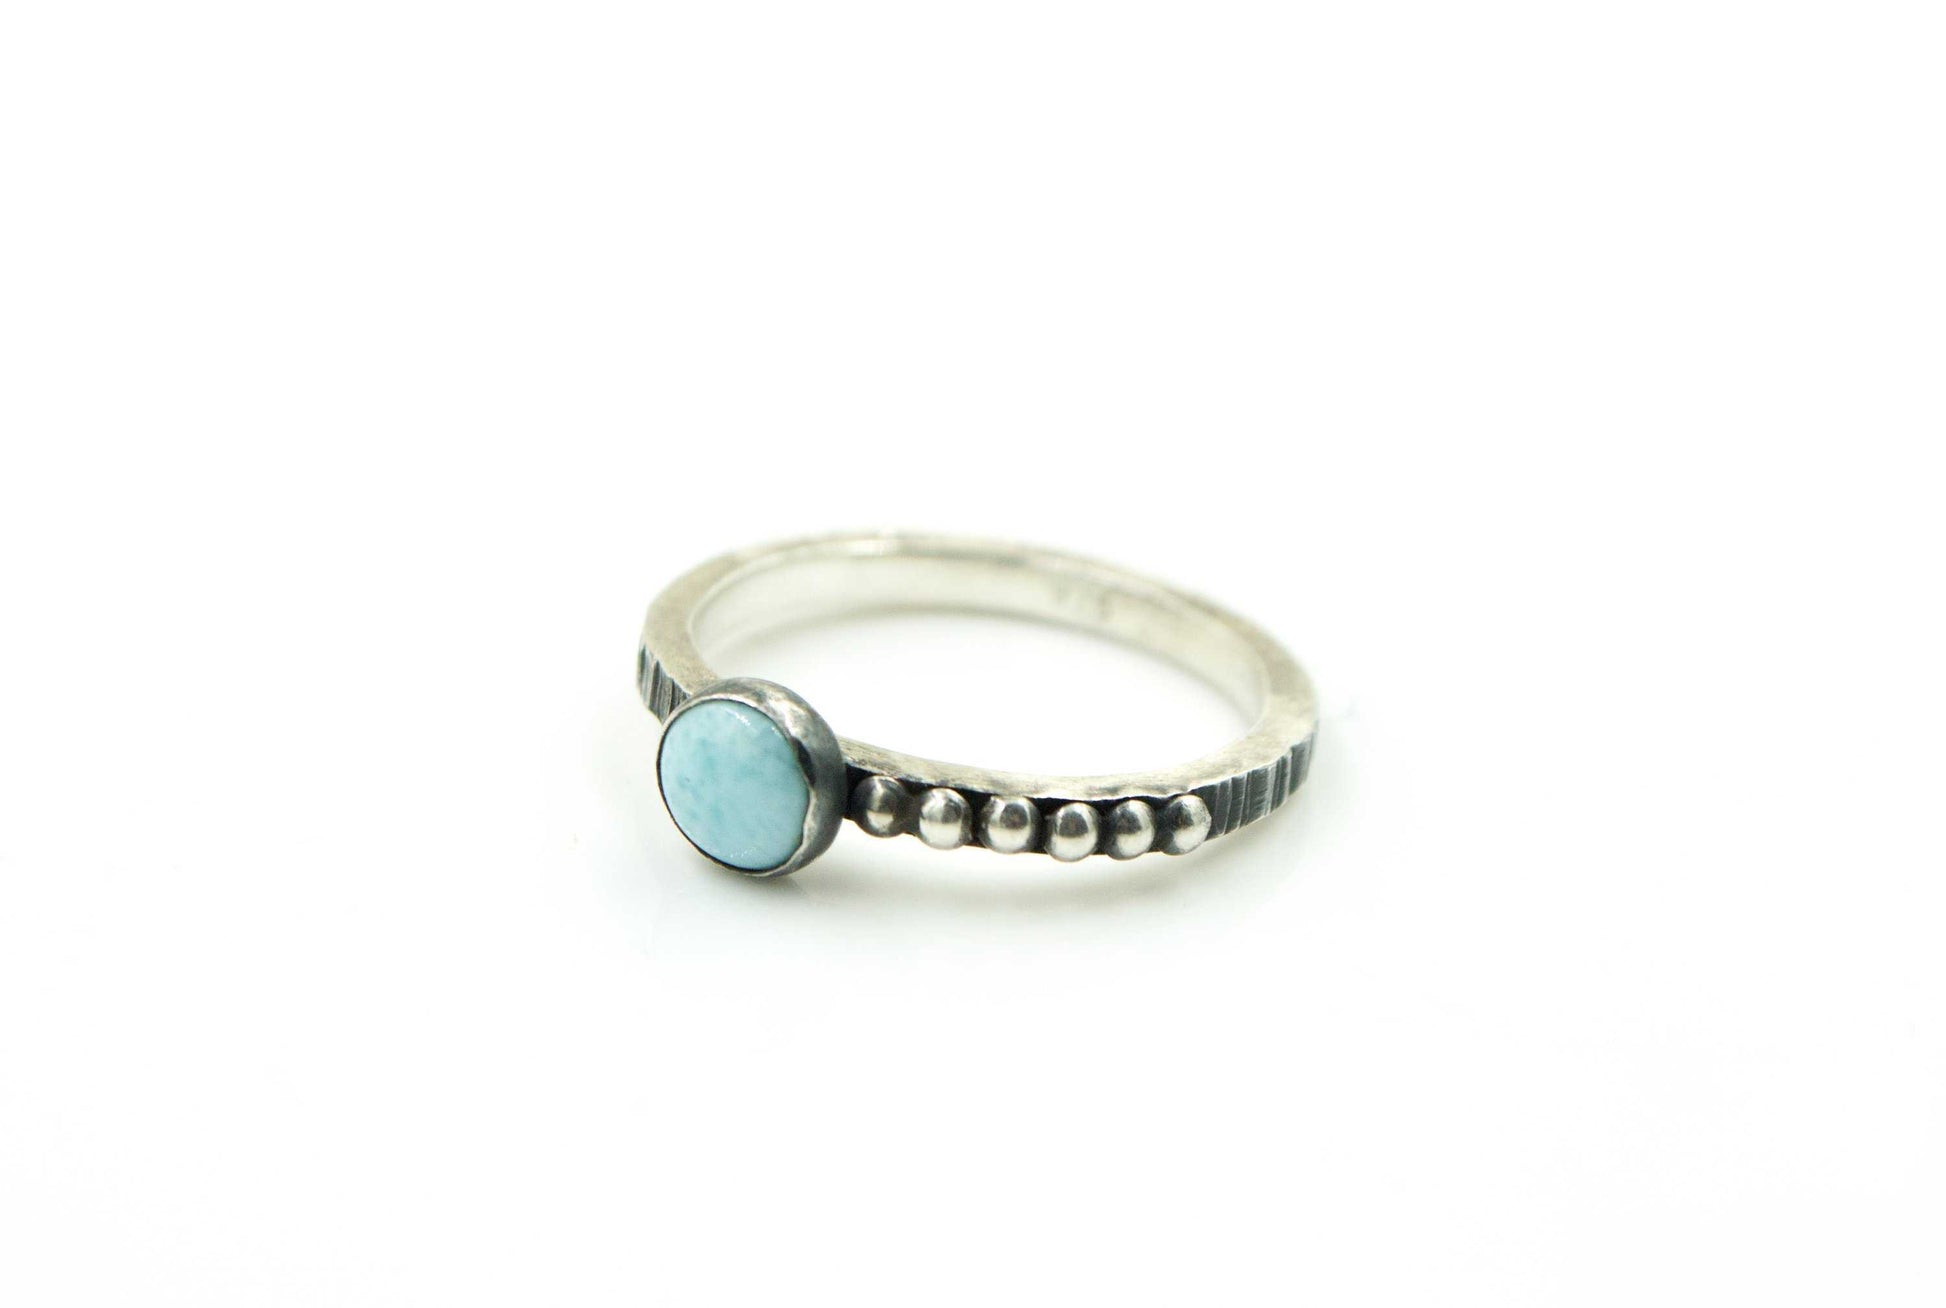 Larimar Stacking Ring w/ Hammer Textured Band in Recycled Sterling Silver - shopcontrabrands.com